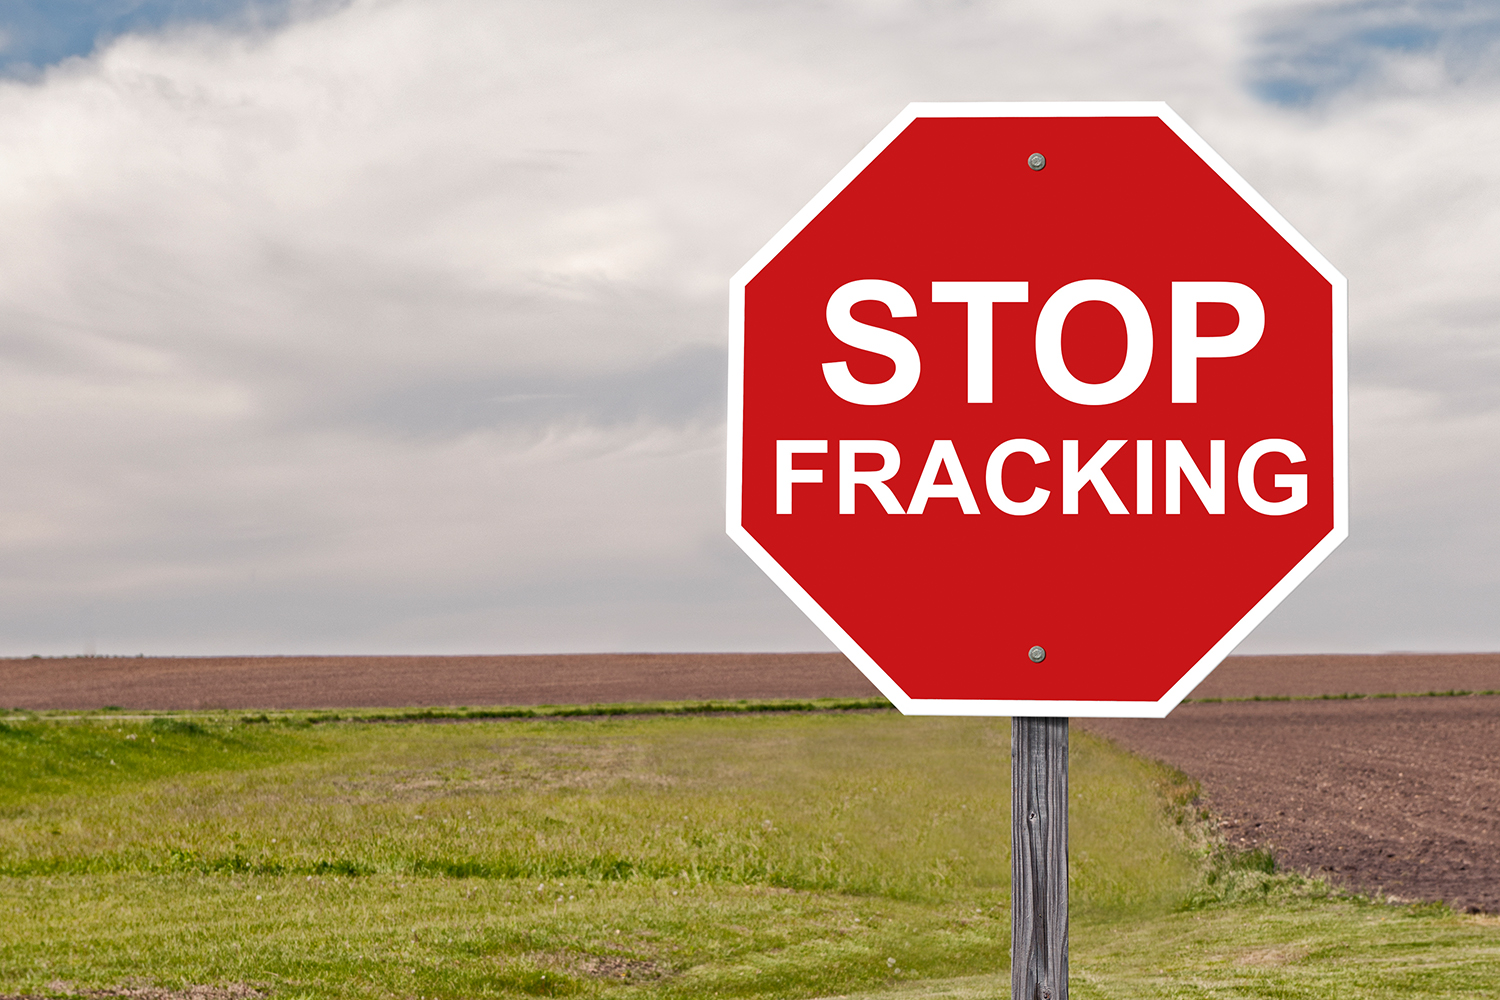 How the Term ‘Fracking’ Made an Entire Infrastructure Publicly Visible 